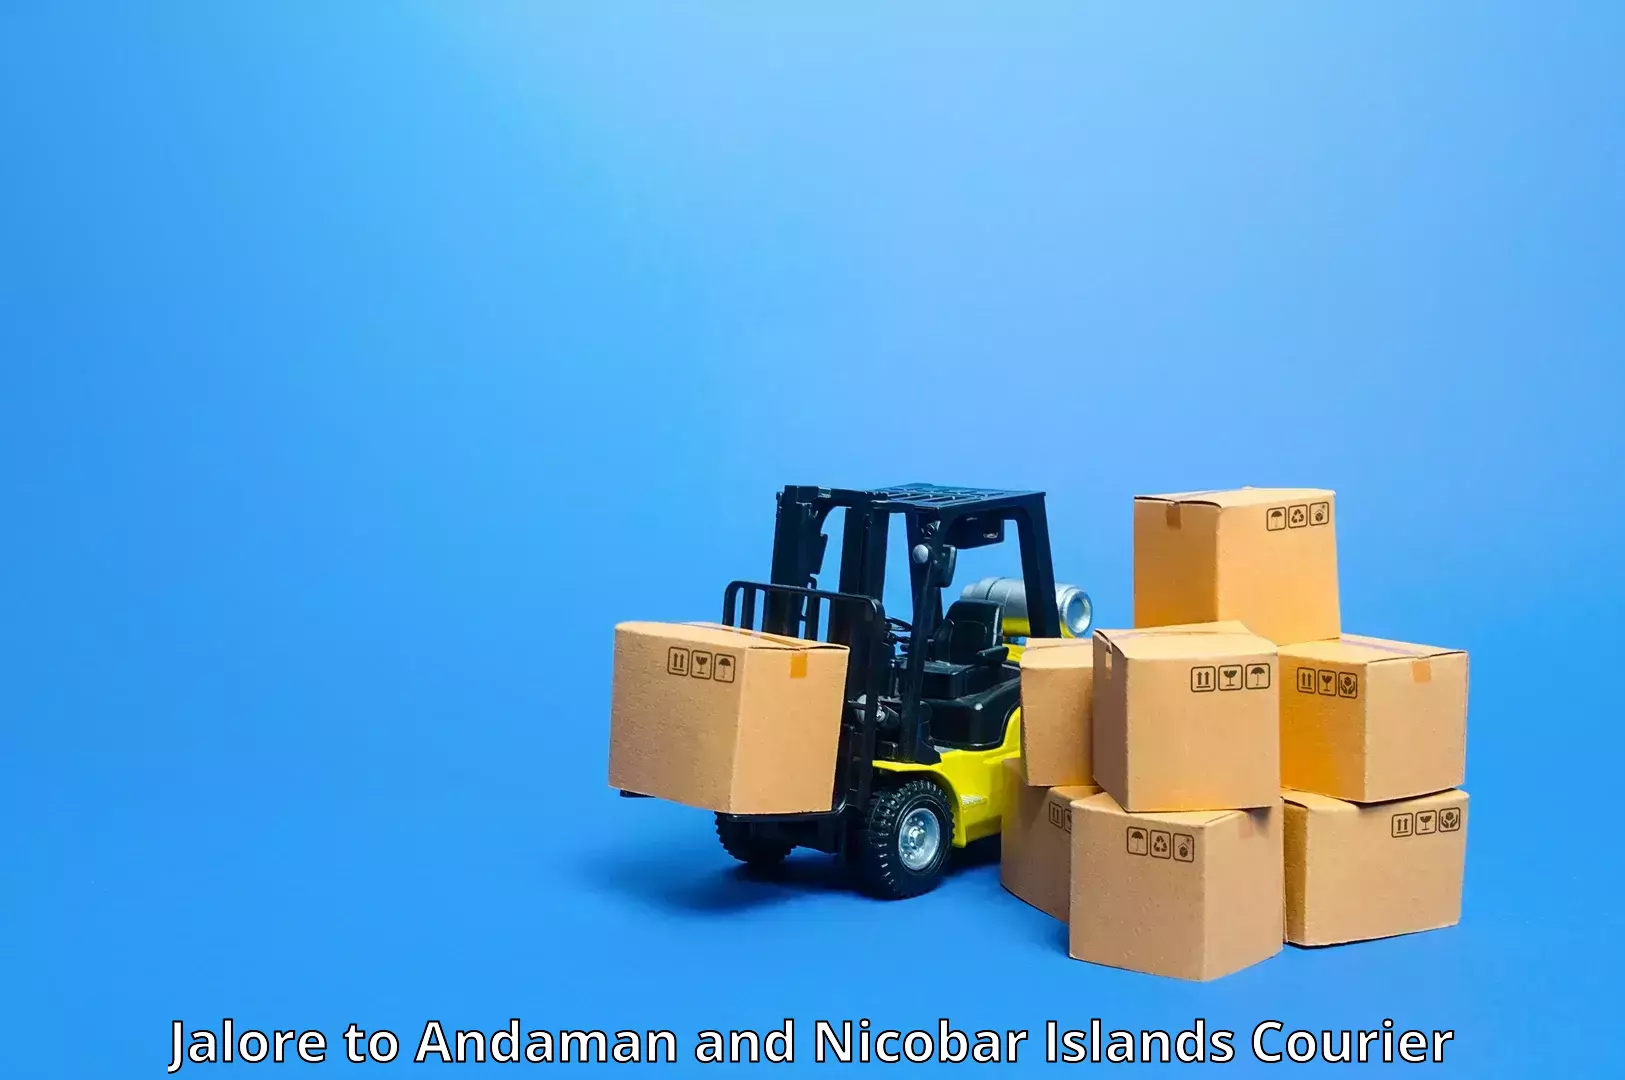 Advanced courier platforms in Jalore to Andaman and Nicobar Islands